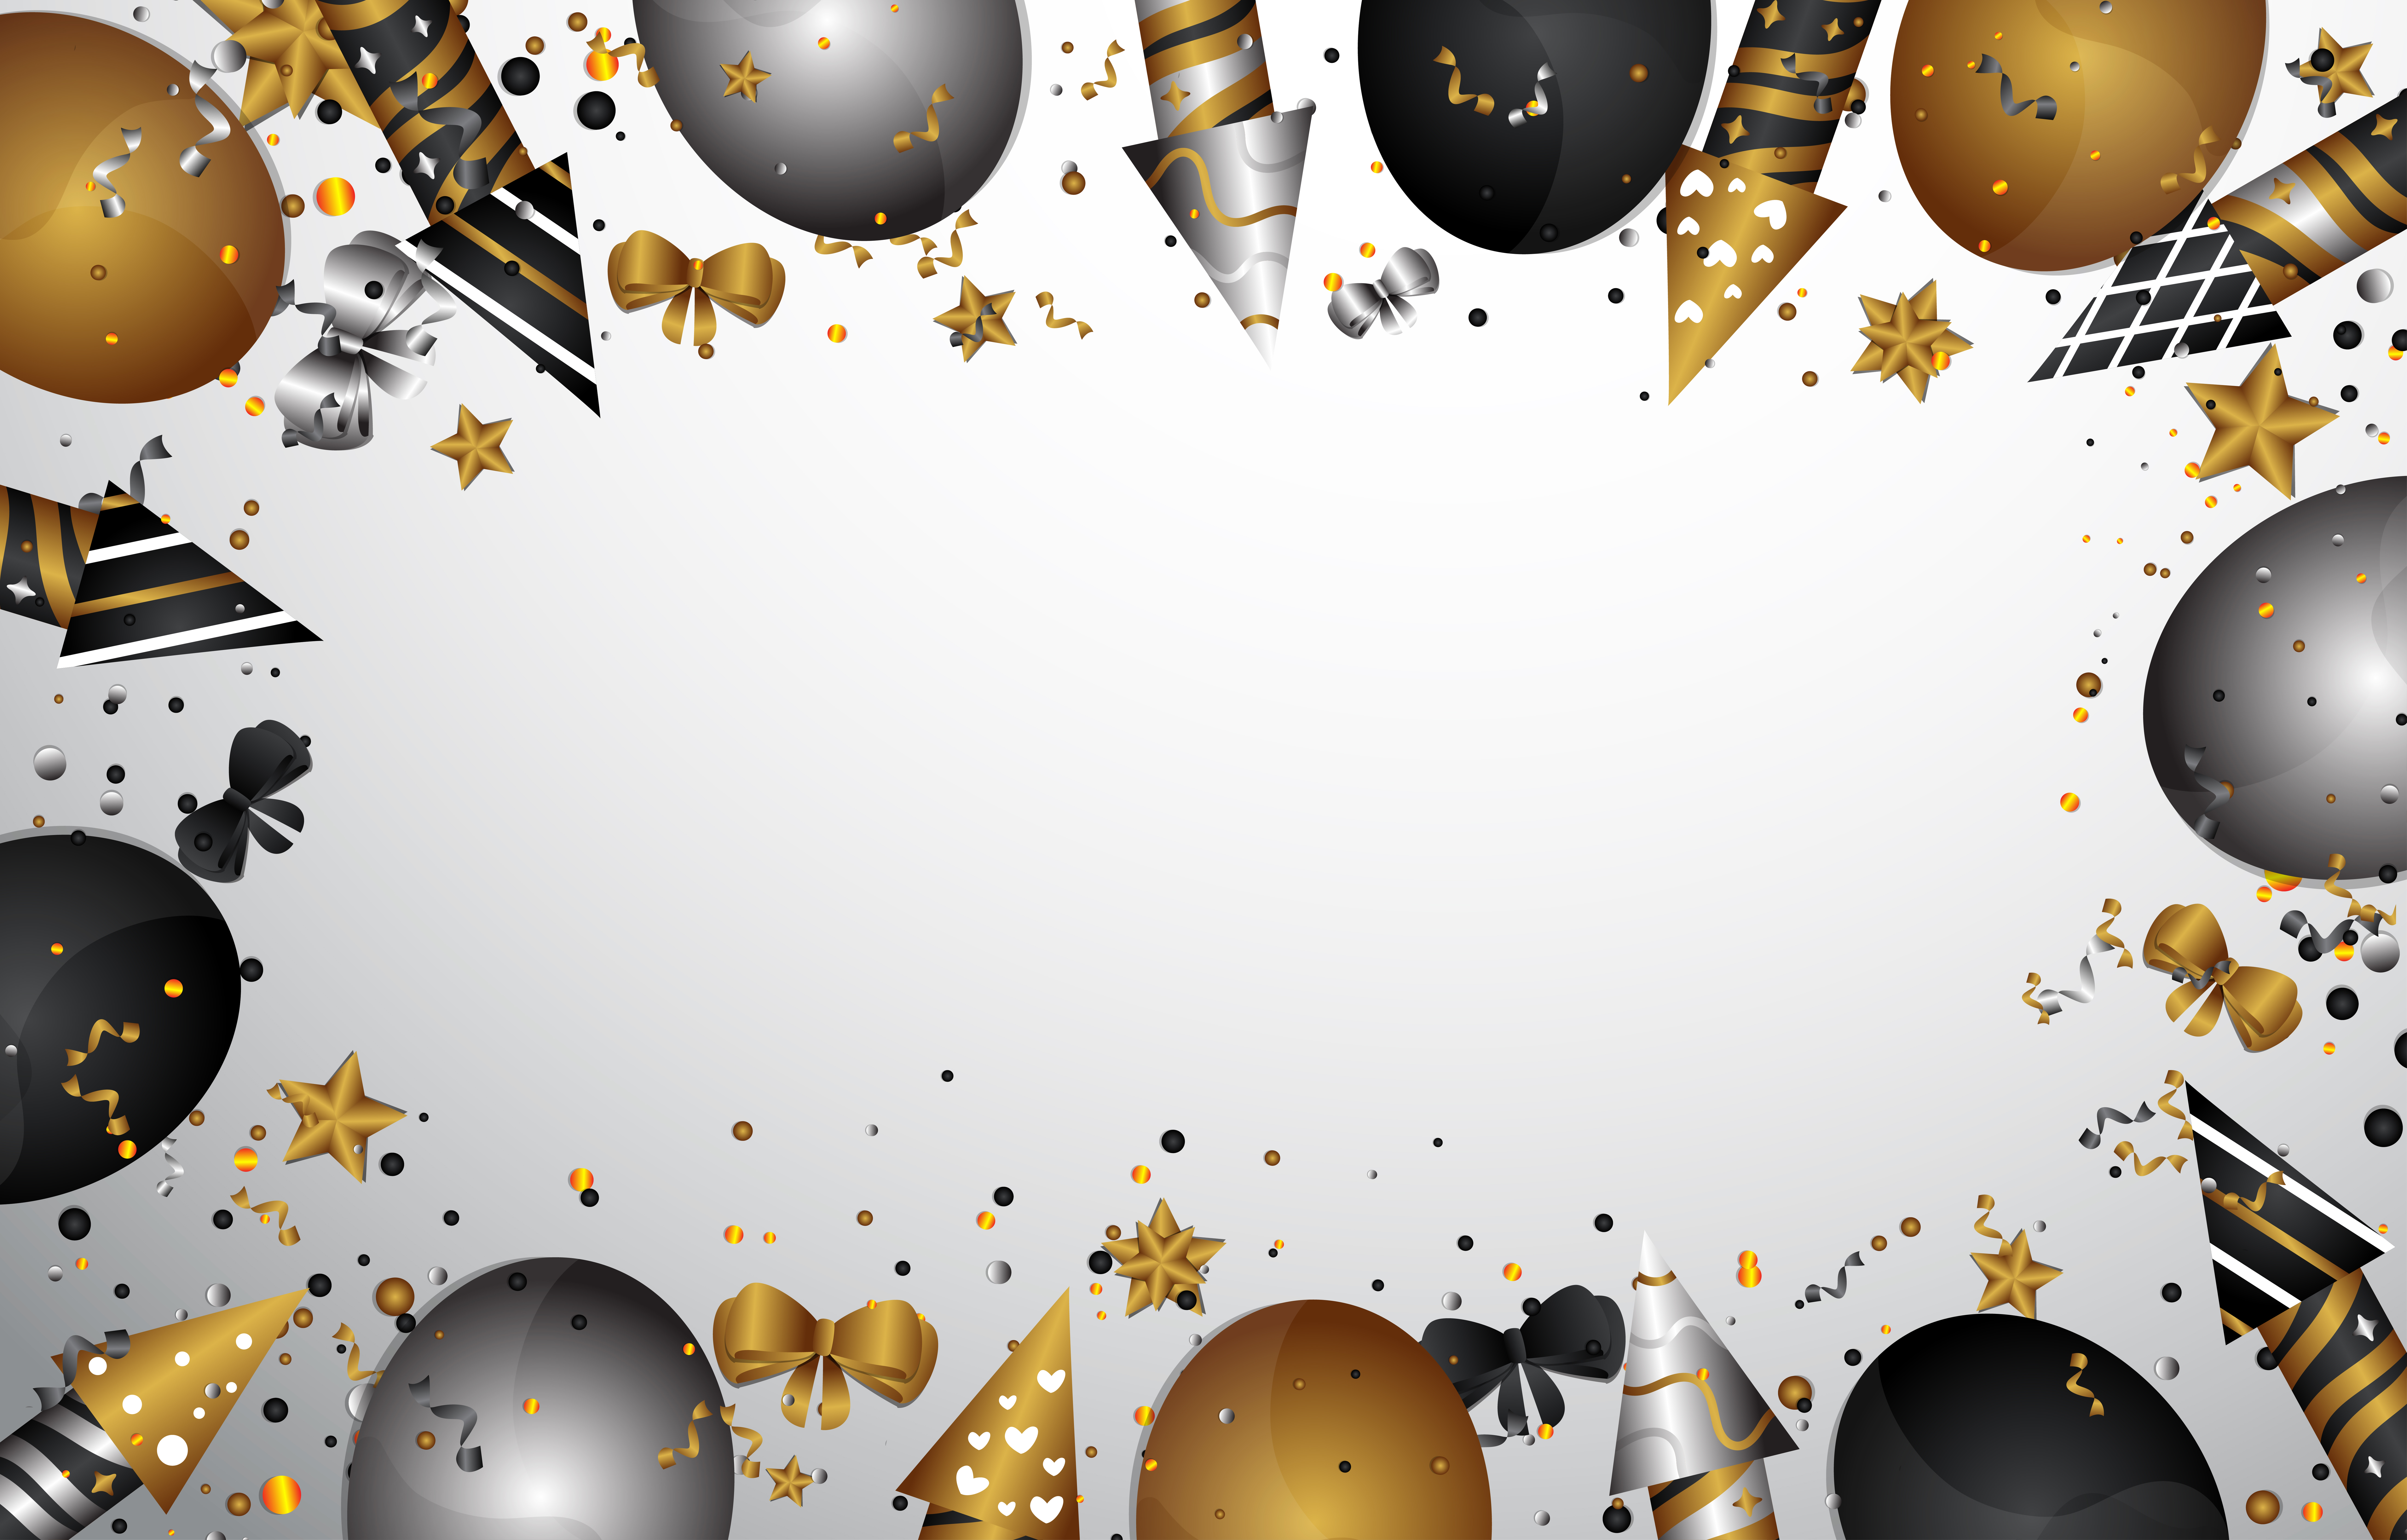 New Year Celebration Background 1594522   Download Free Vectors